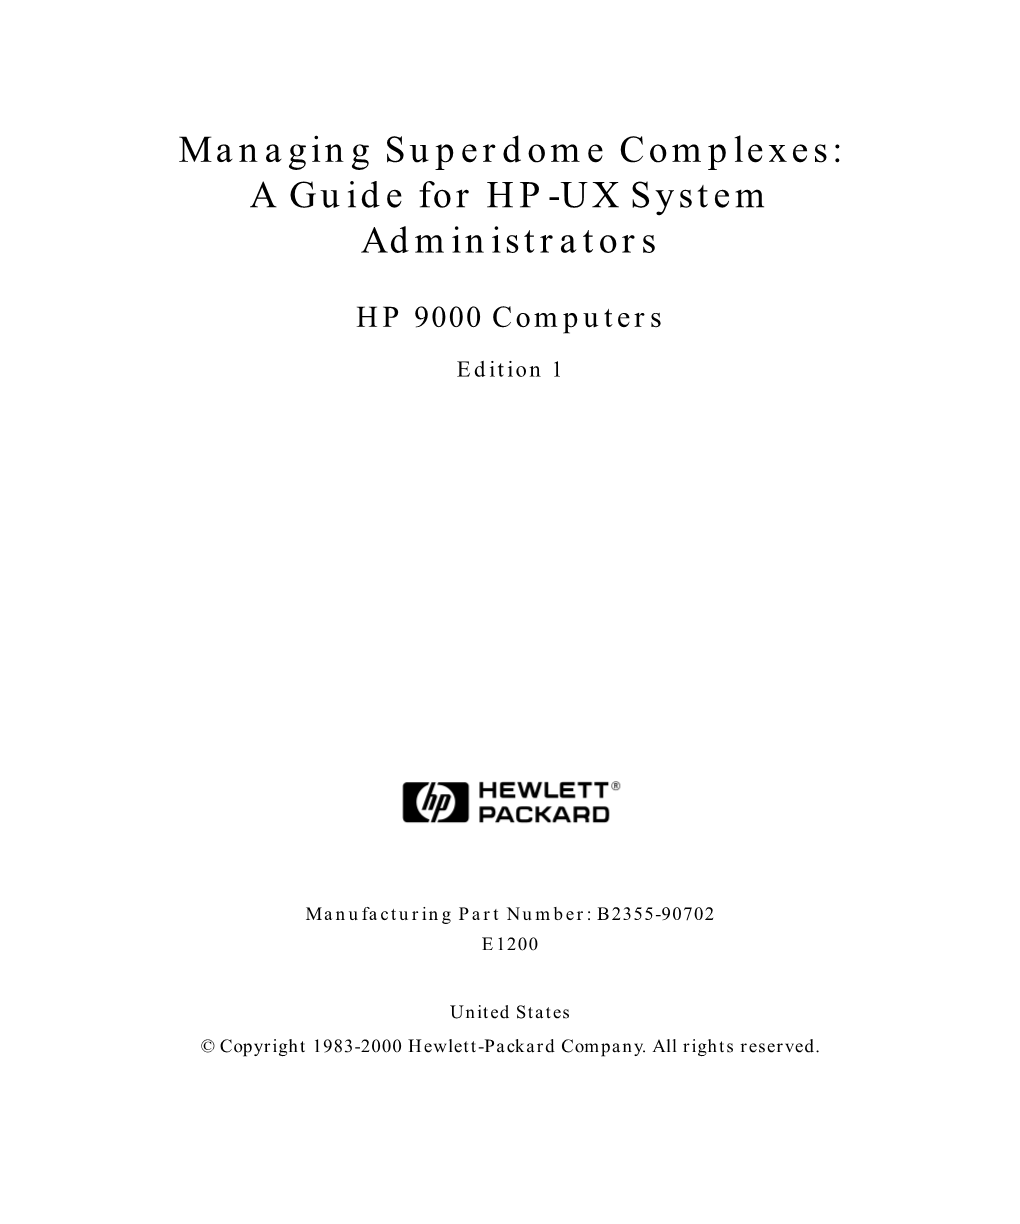 Managing Superdome Complexes: a Guide for HP-UX System Administrators